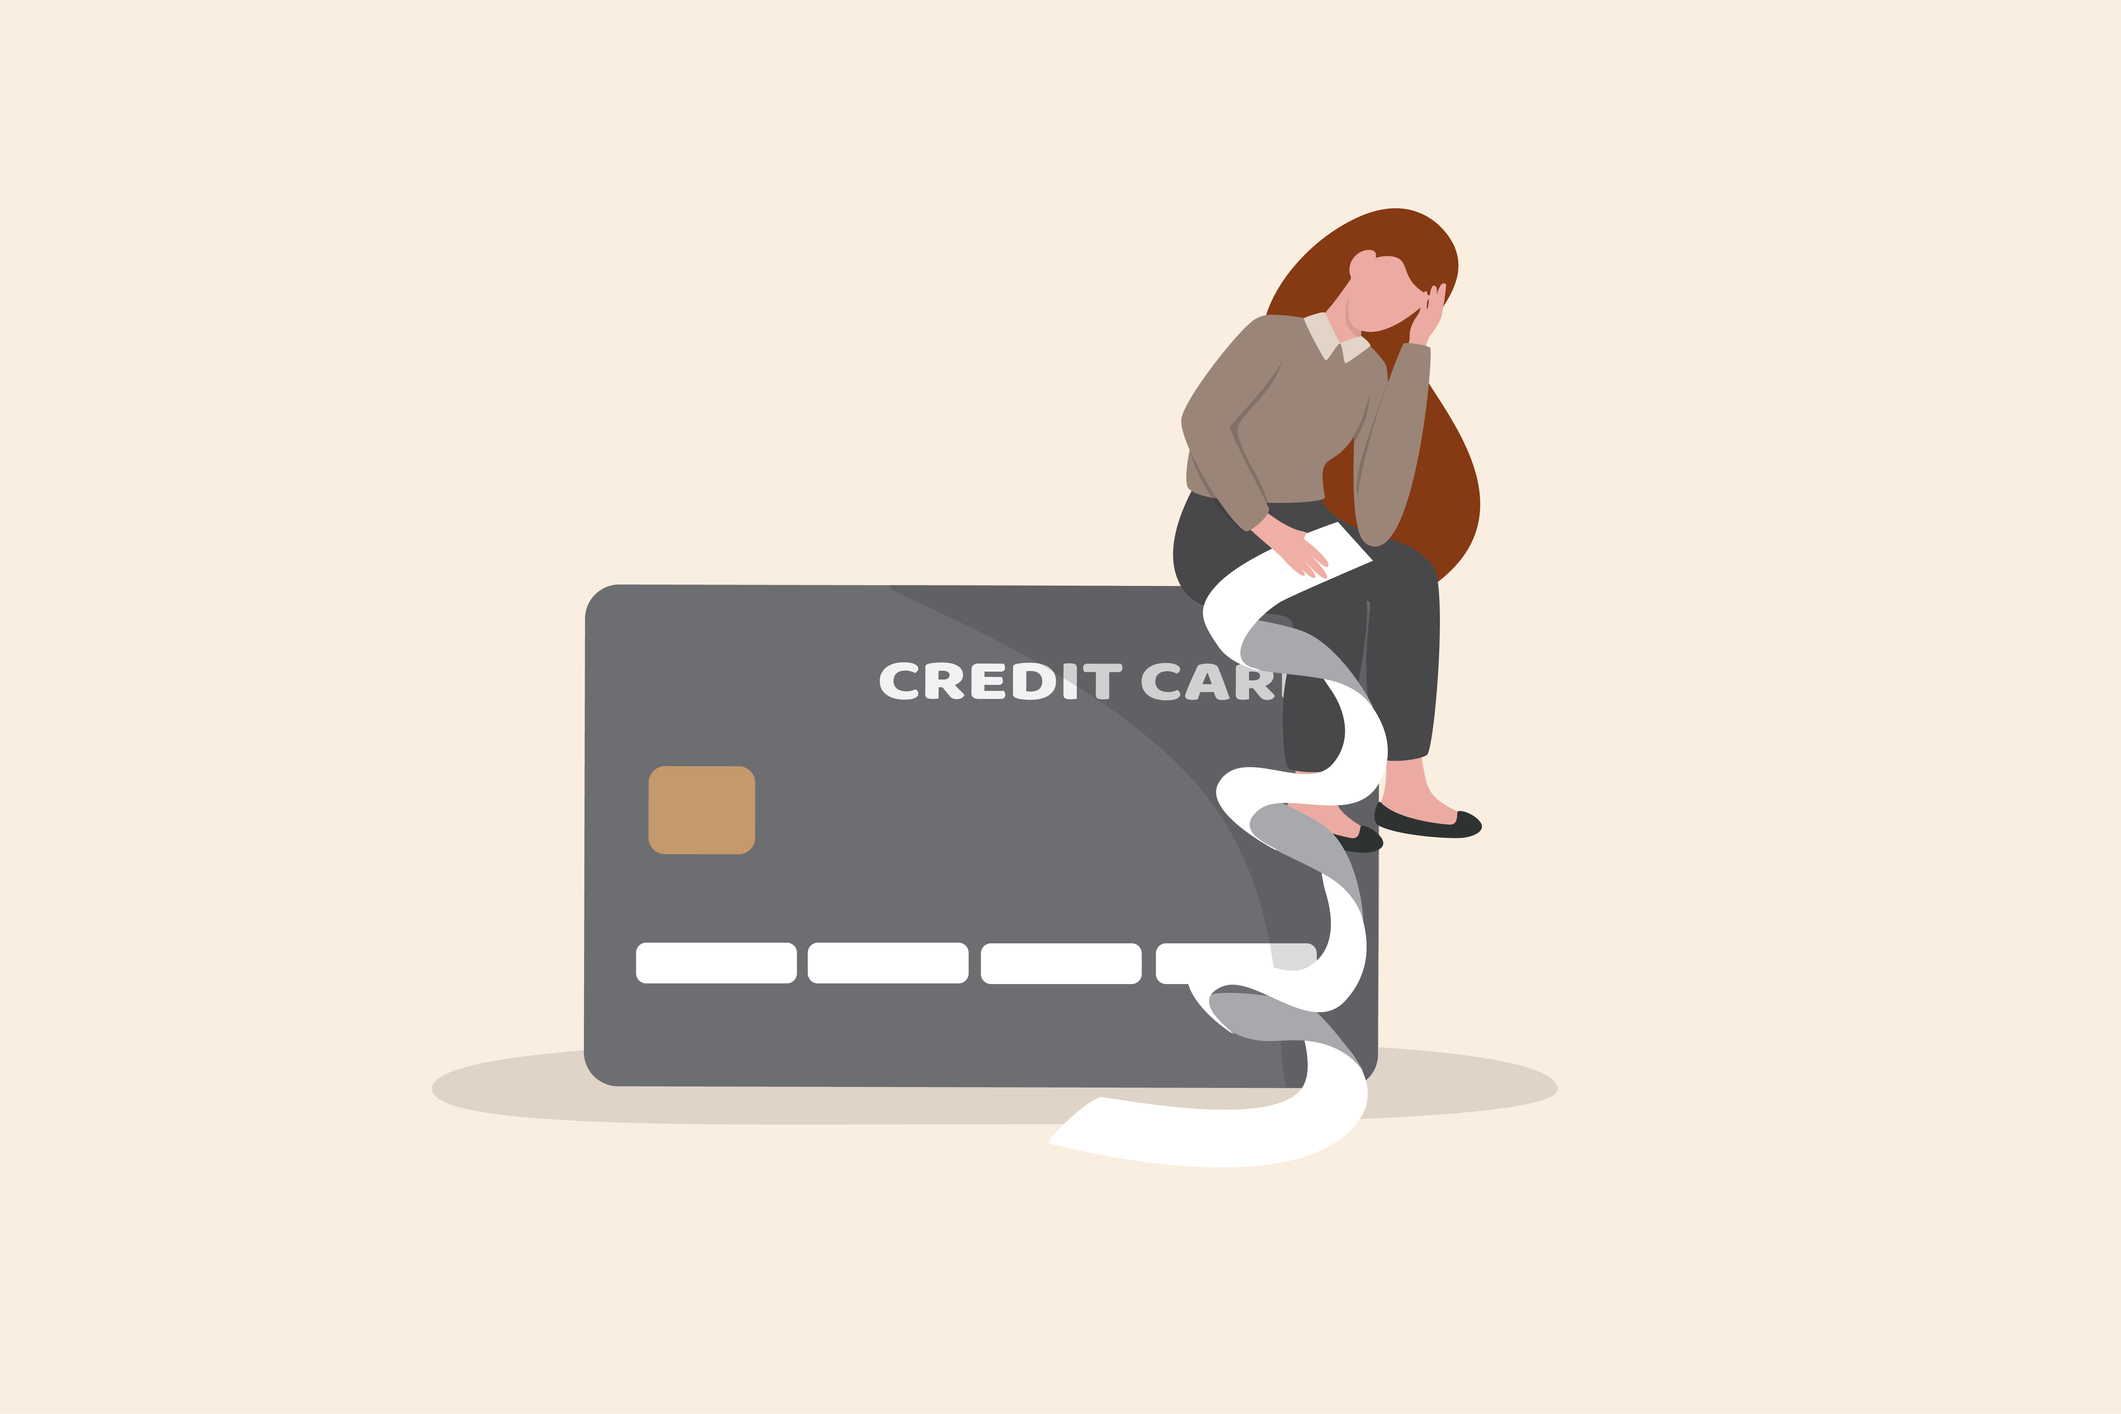 Credit card debt problem, overspend or shopping trouble, consumerism or buying addicted causing financial problem concept, hopeless woman sitting with long list overdue bills on credit card.